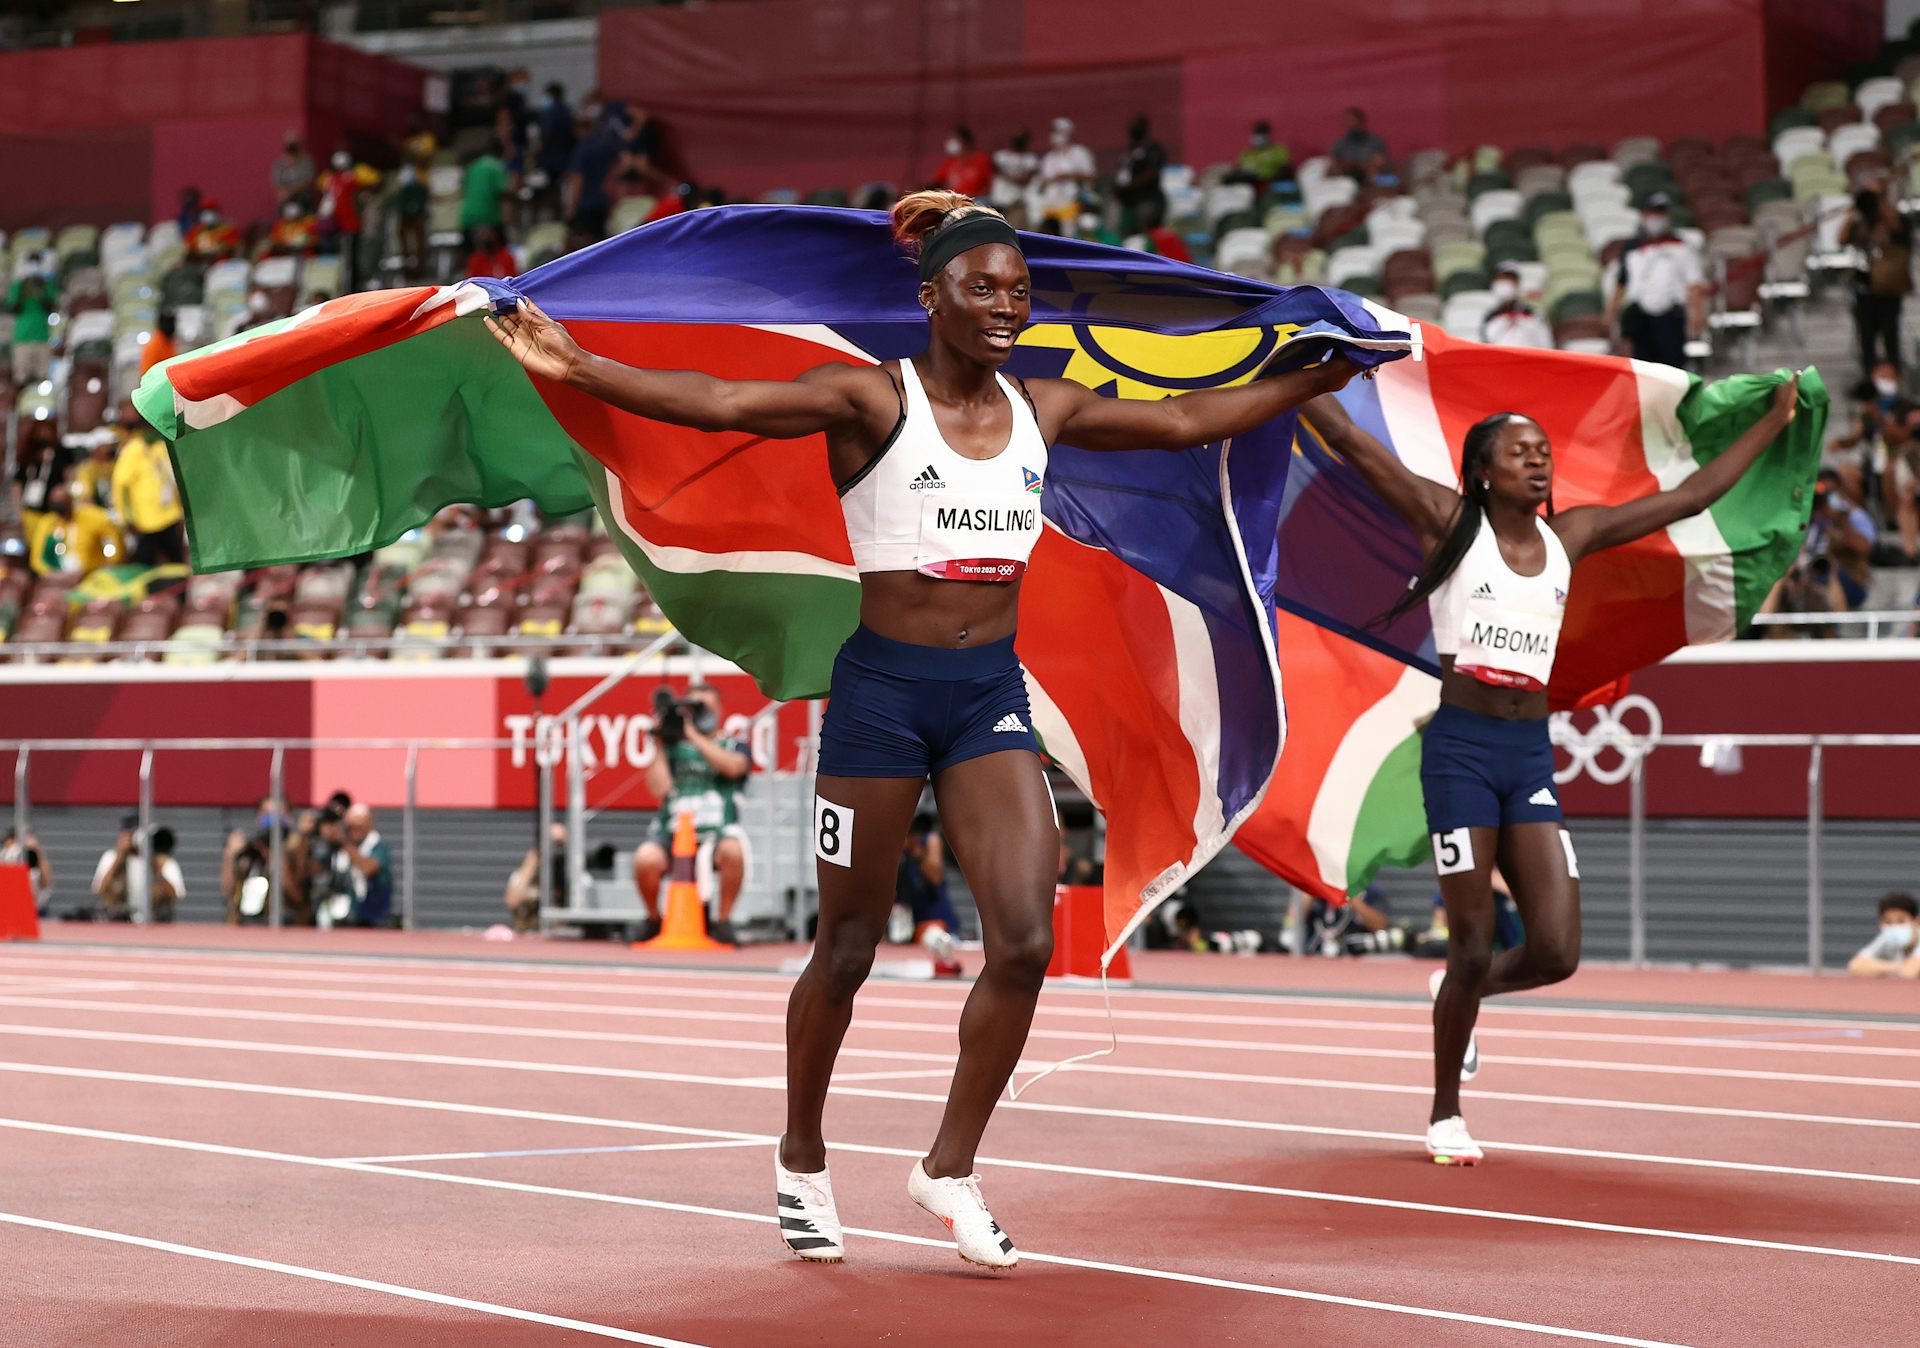 Olympics Namibias sprinters highlight a flawed testosterone testing system pic